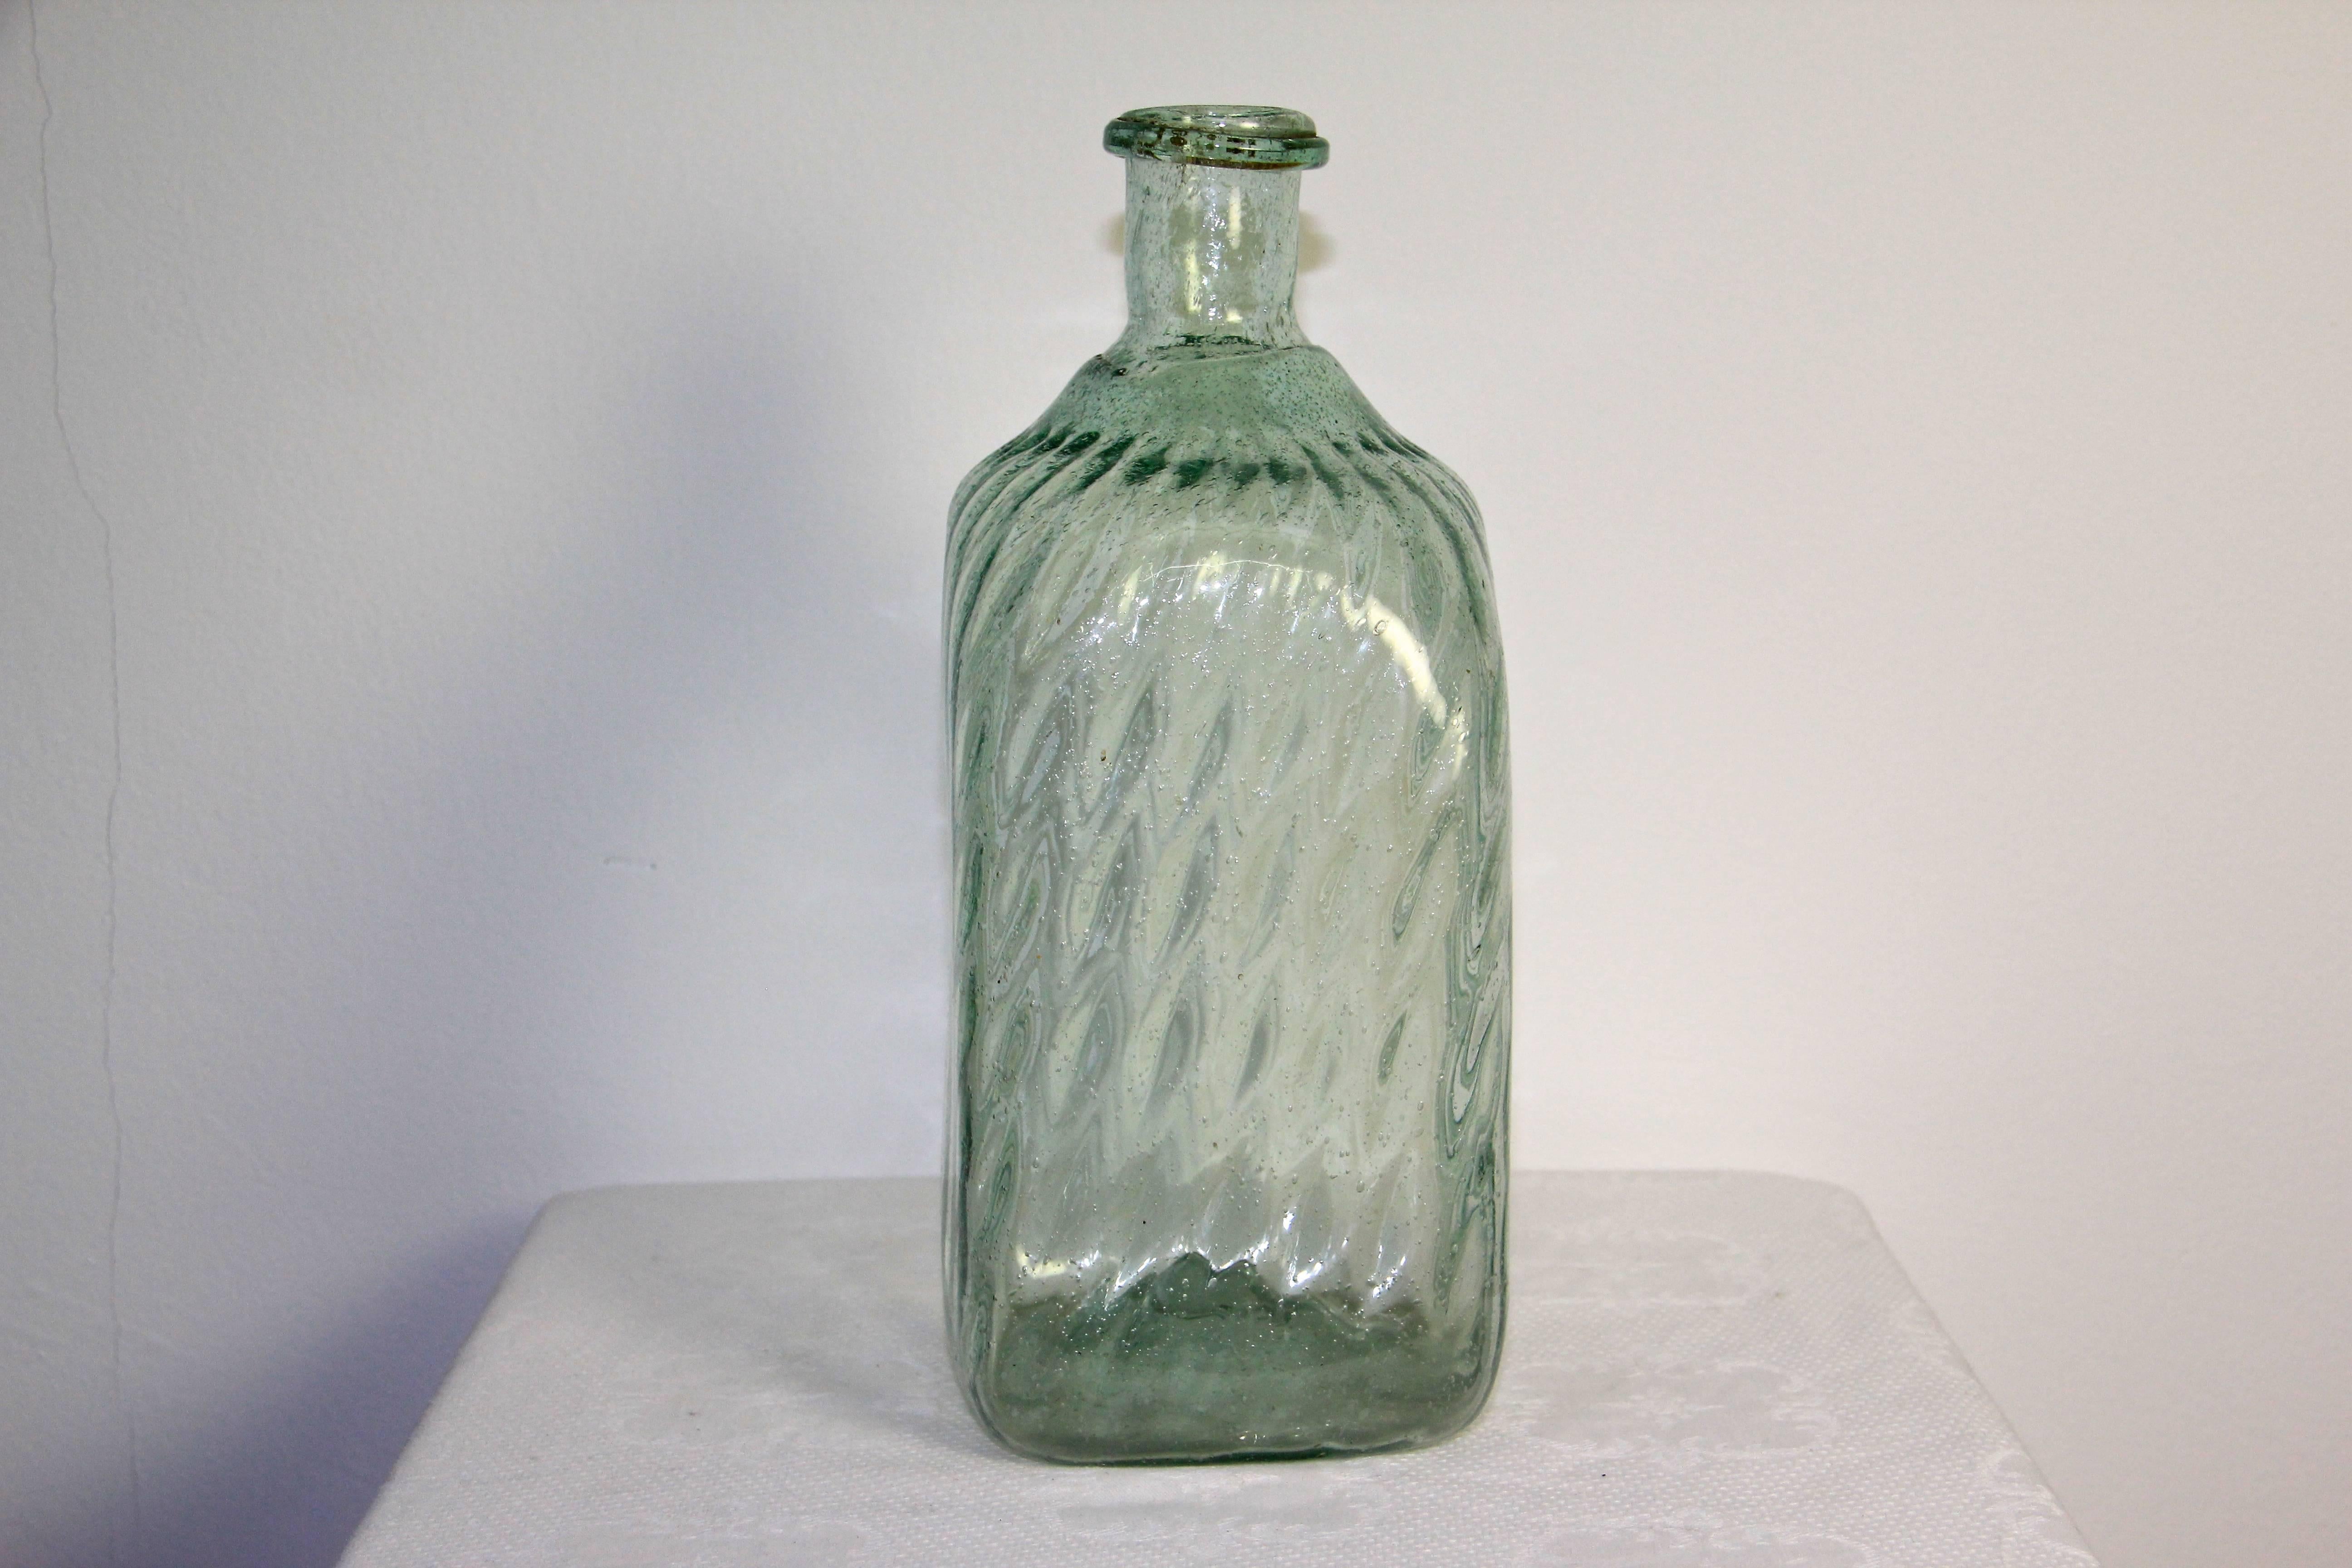 To find one of these totally rare waterbottles from the baroque era circa 1750, you have to be very lucky and this item is in an absolute breathtaking condition too! 
Because of the very thin, mouth-blown glass not many of these have survived